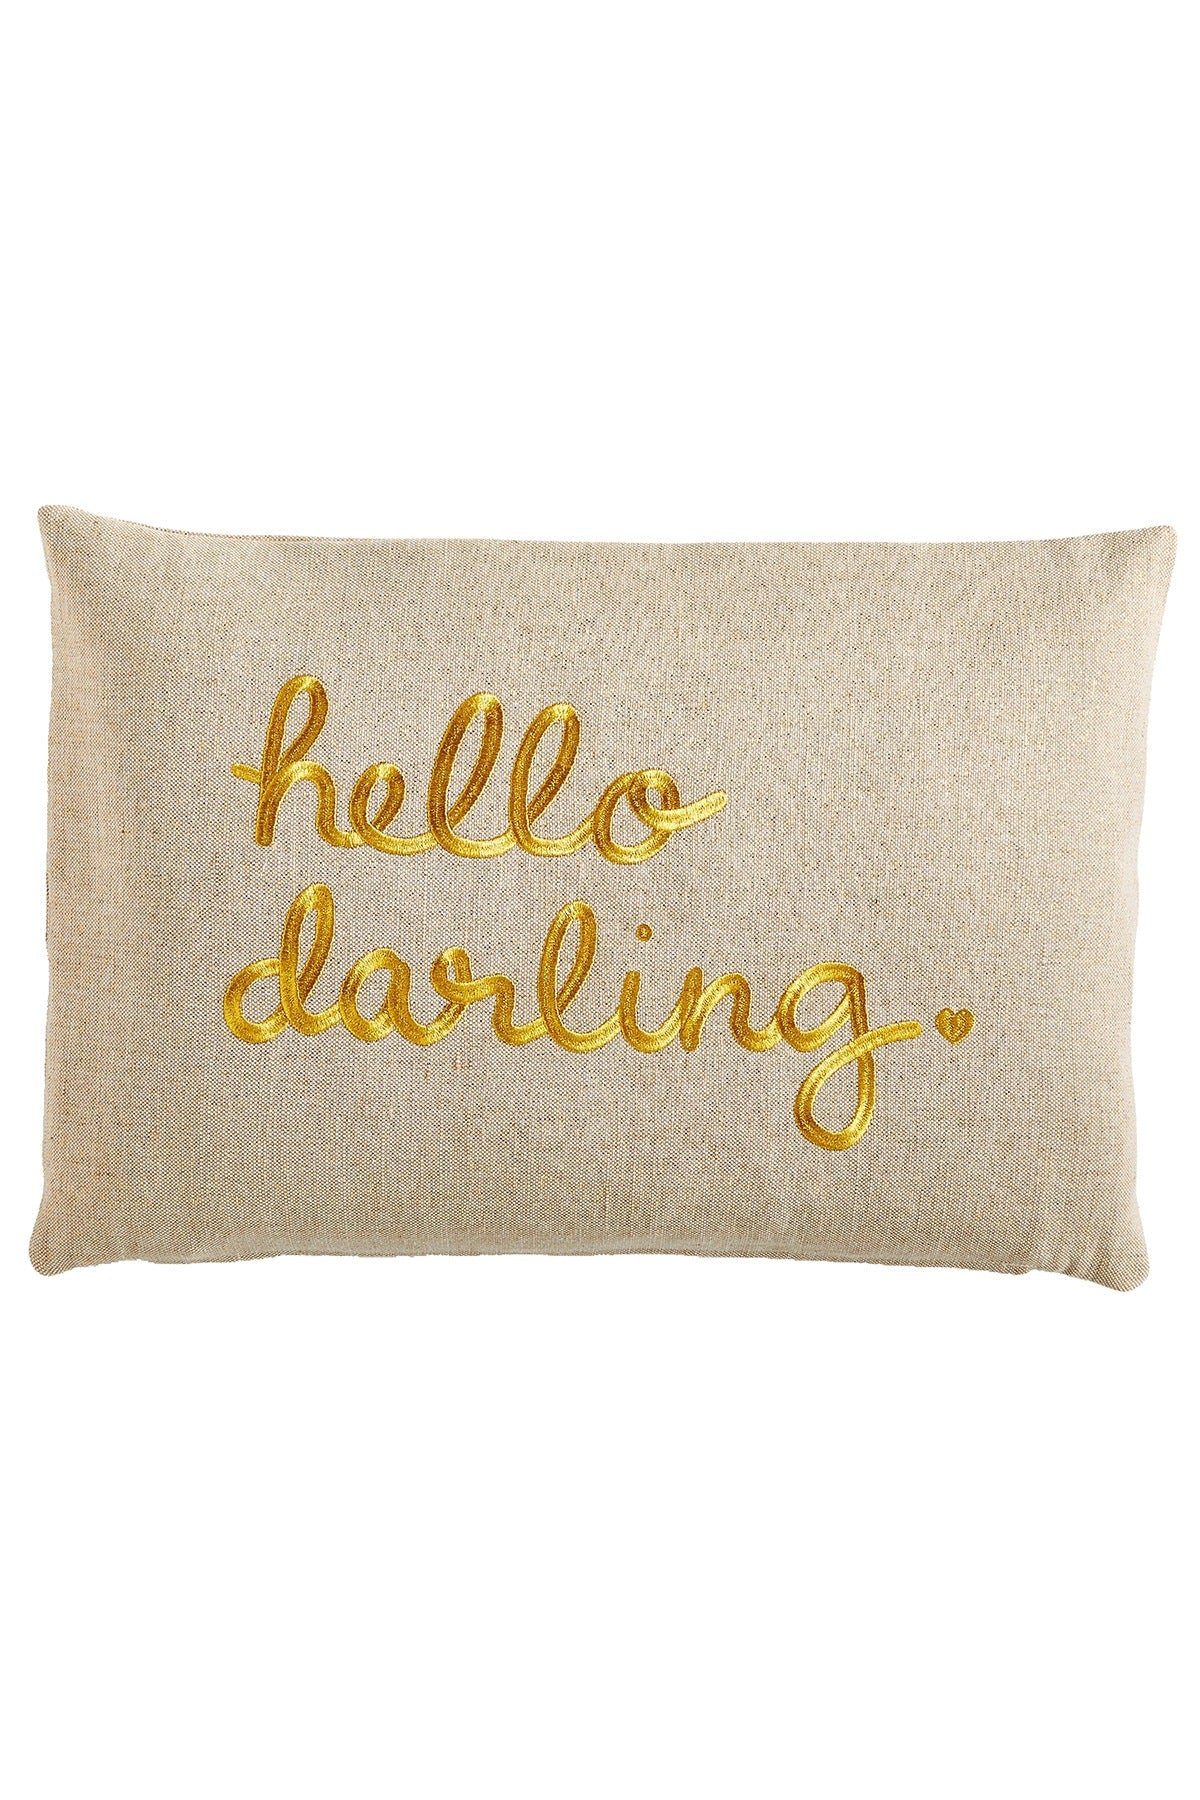 Celebrate Shop Taupe Hello Darling Decorative Throw Pillow